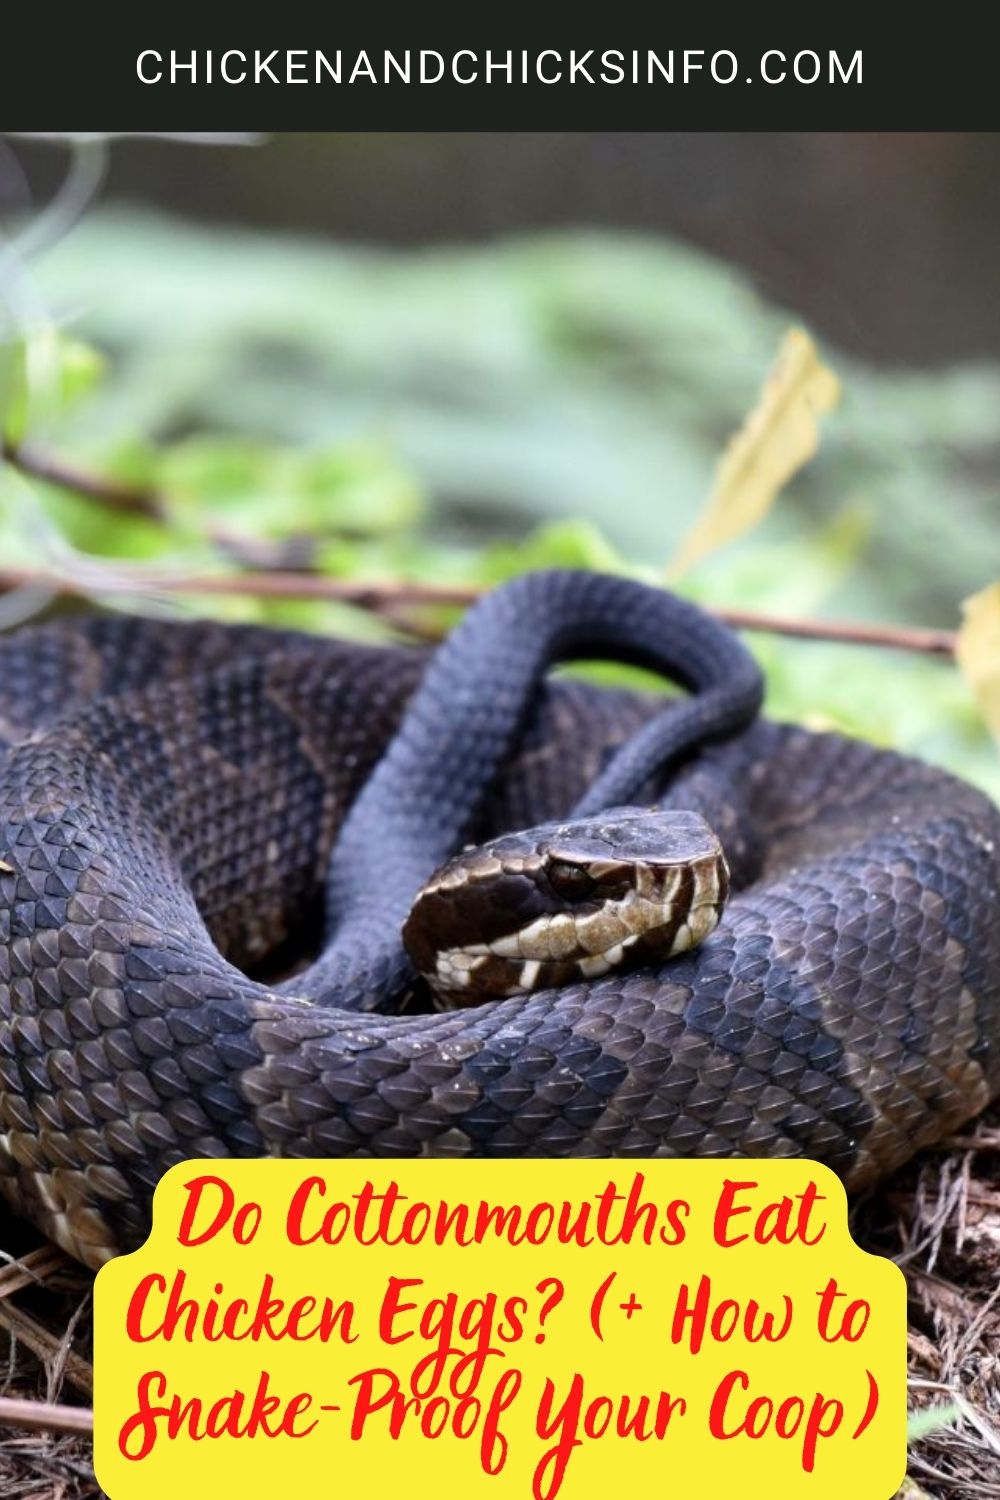 Do Cottonmouths Eat Chicken Eggs? (+ How to Snake-Proof Your Coop) psoter.
